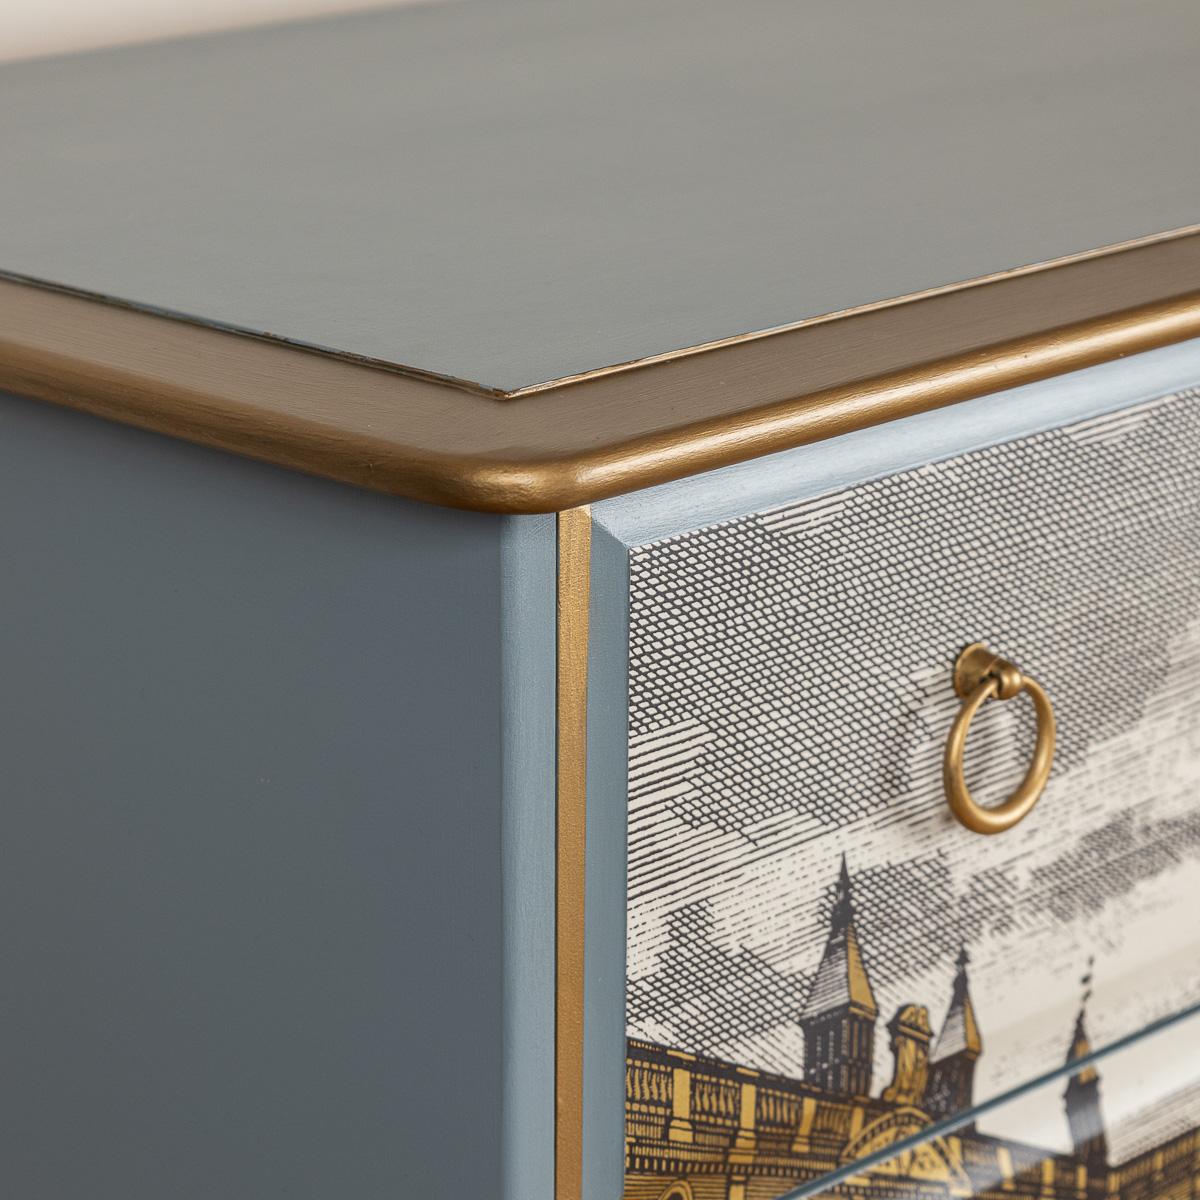 Metal Stag Minstrel Chest Of Drawers Handpainted & Decorated With Zoffany Paper